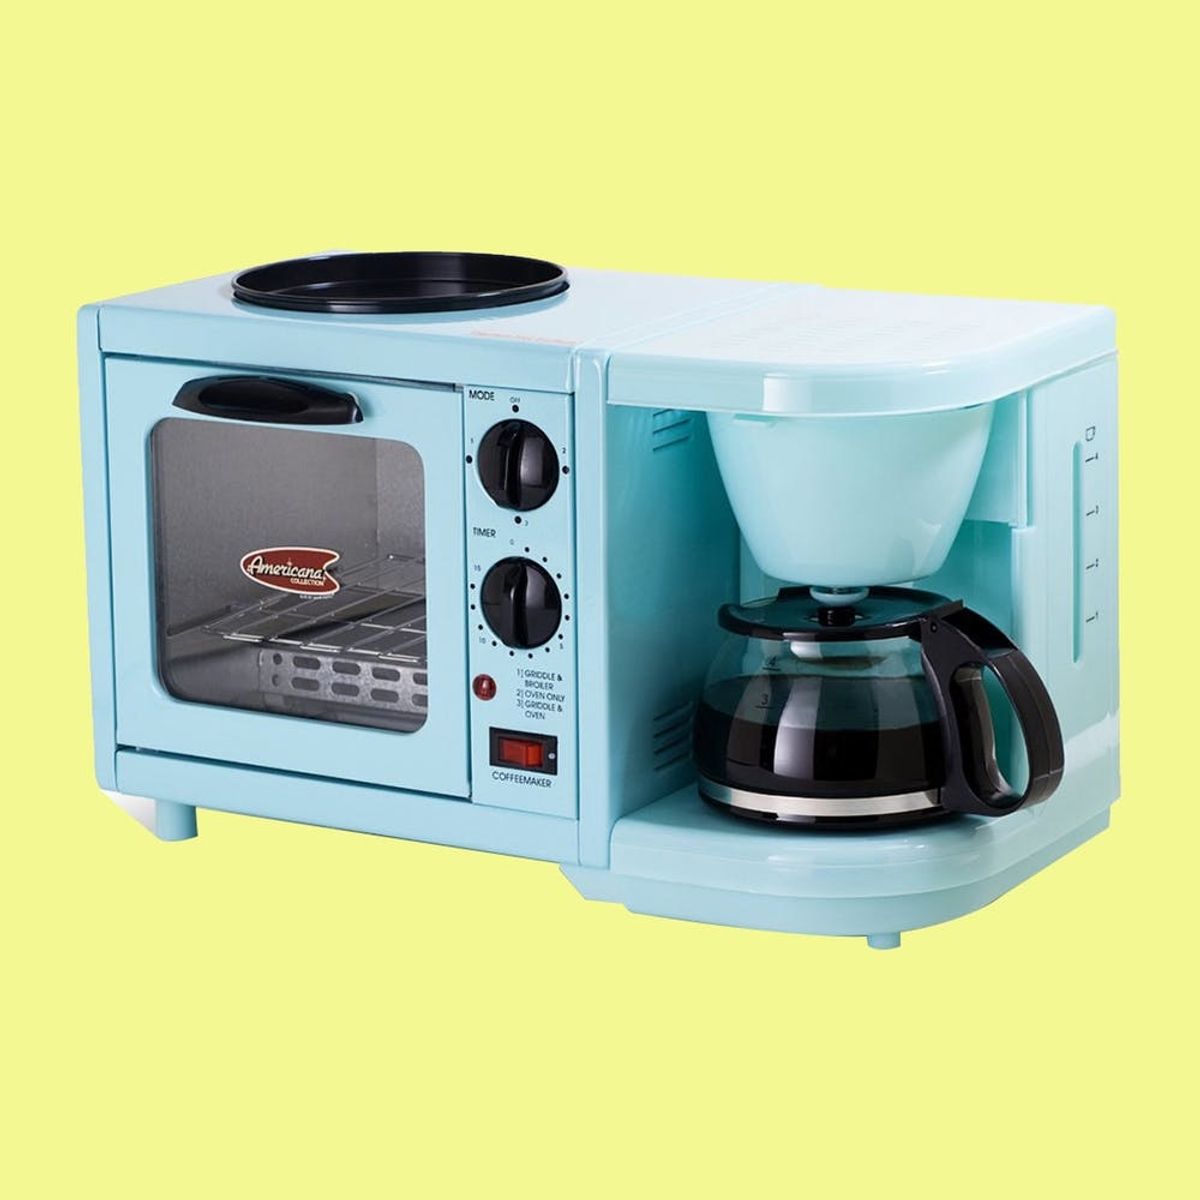 10 Kitchen Gadgets to Take Dorm Cooking to the Next Level